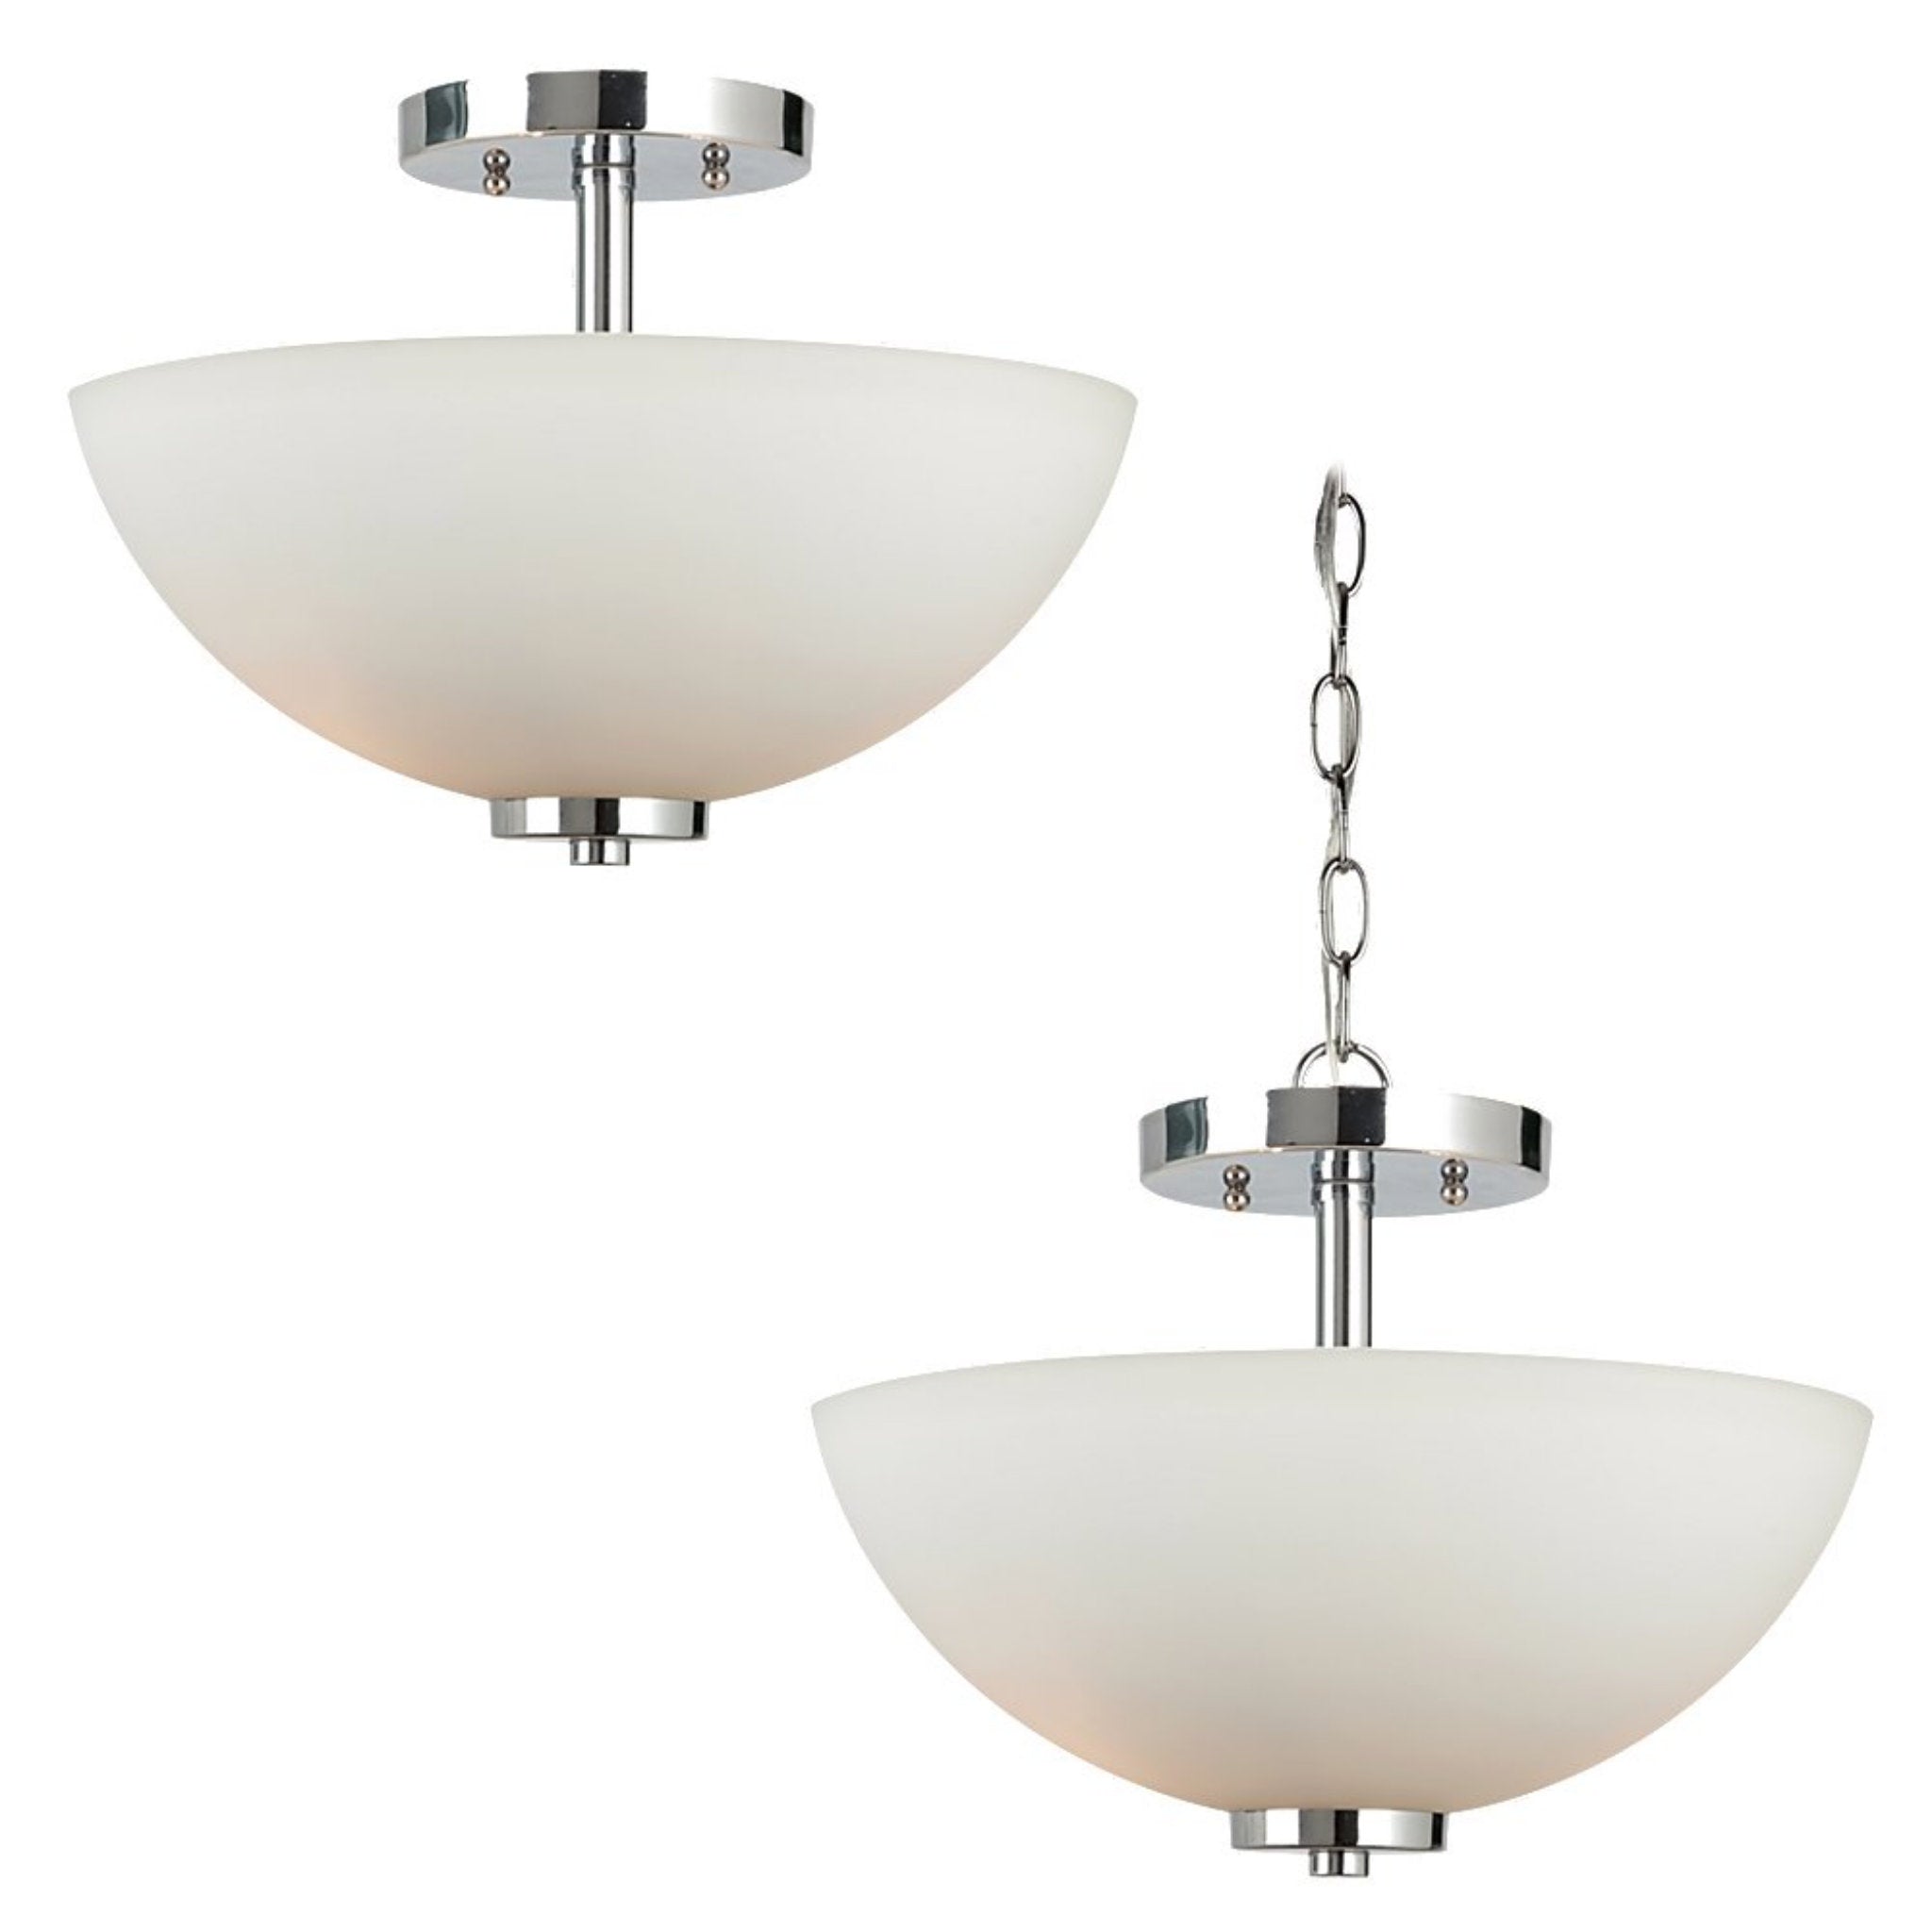 Oslo Two Light Semi-Flush Convertible Pendant Contemporary Ceiling Fixture 13.5" Width 11.25" Height Steel Round Etched / White Inside Shade in Chrome